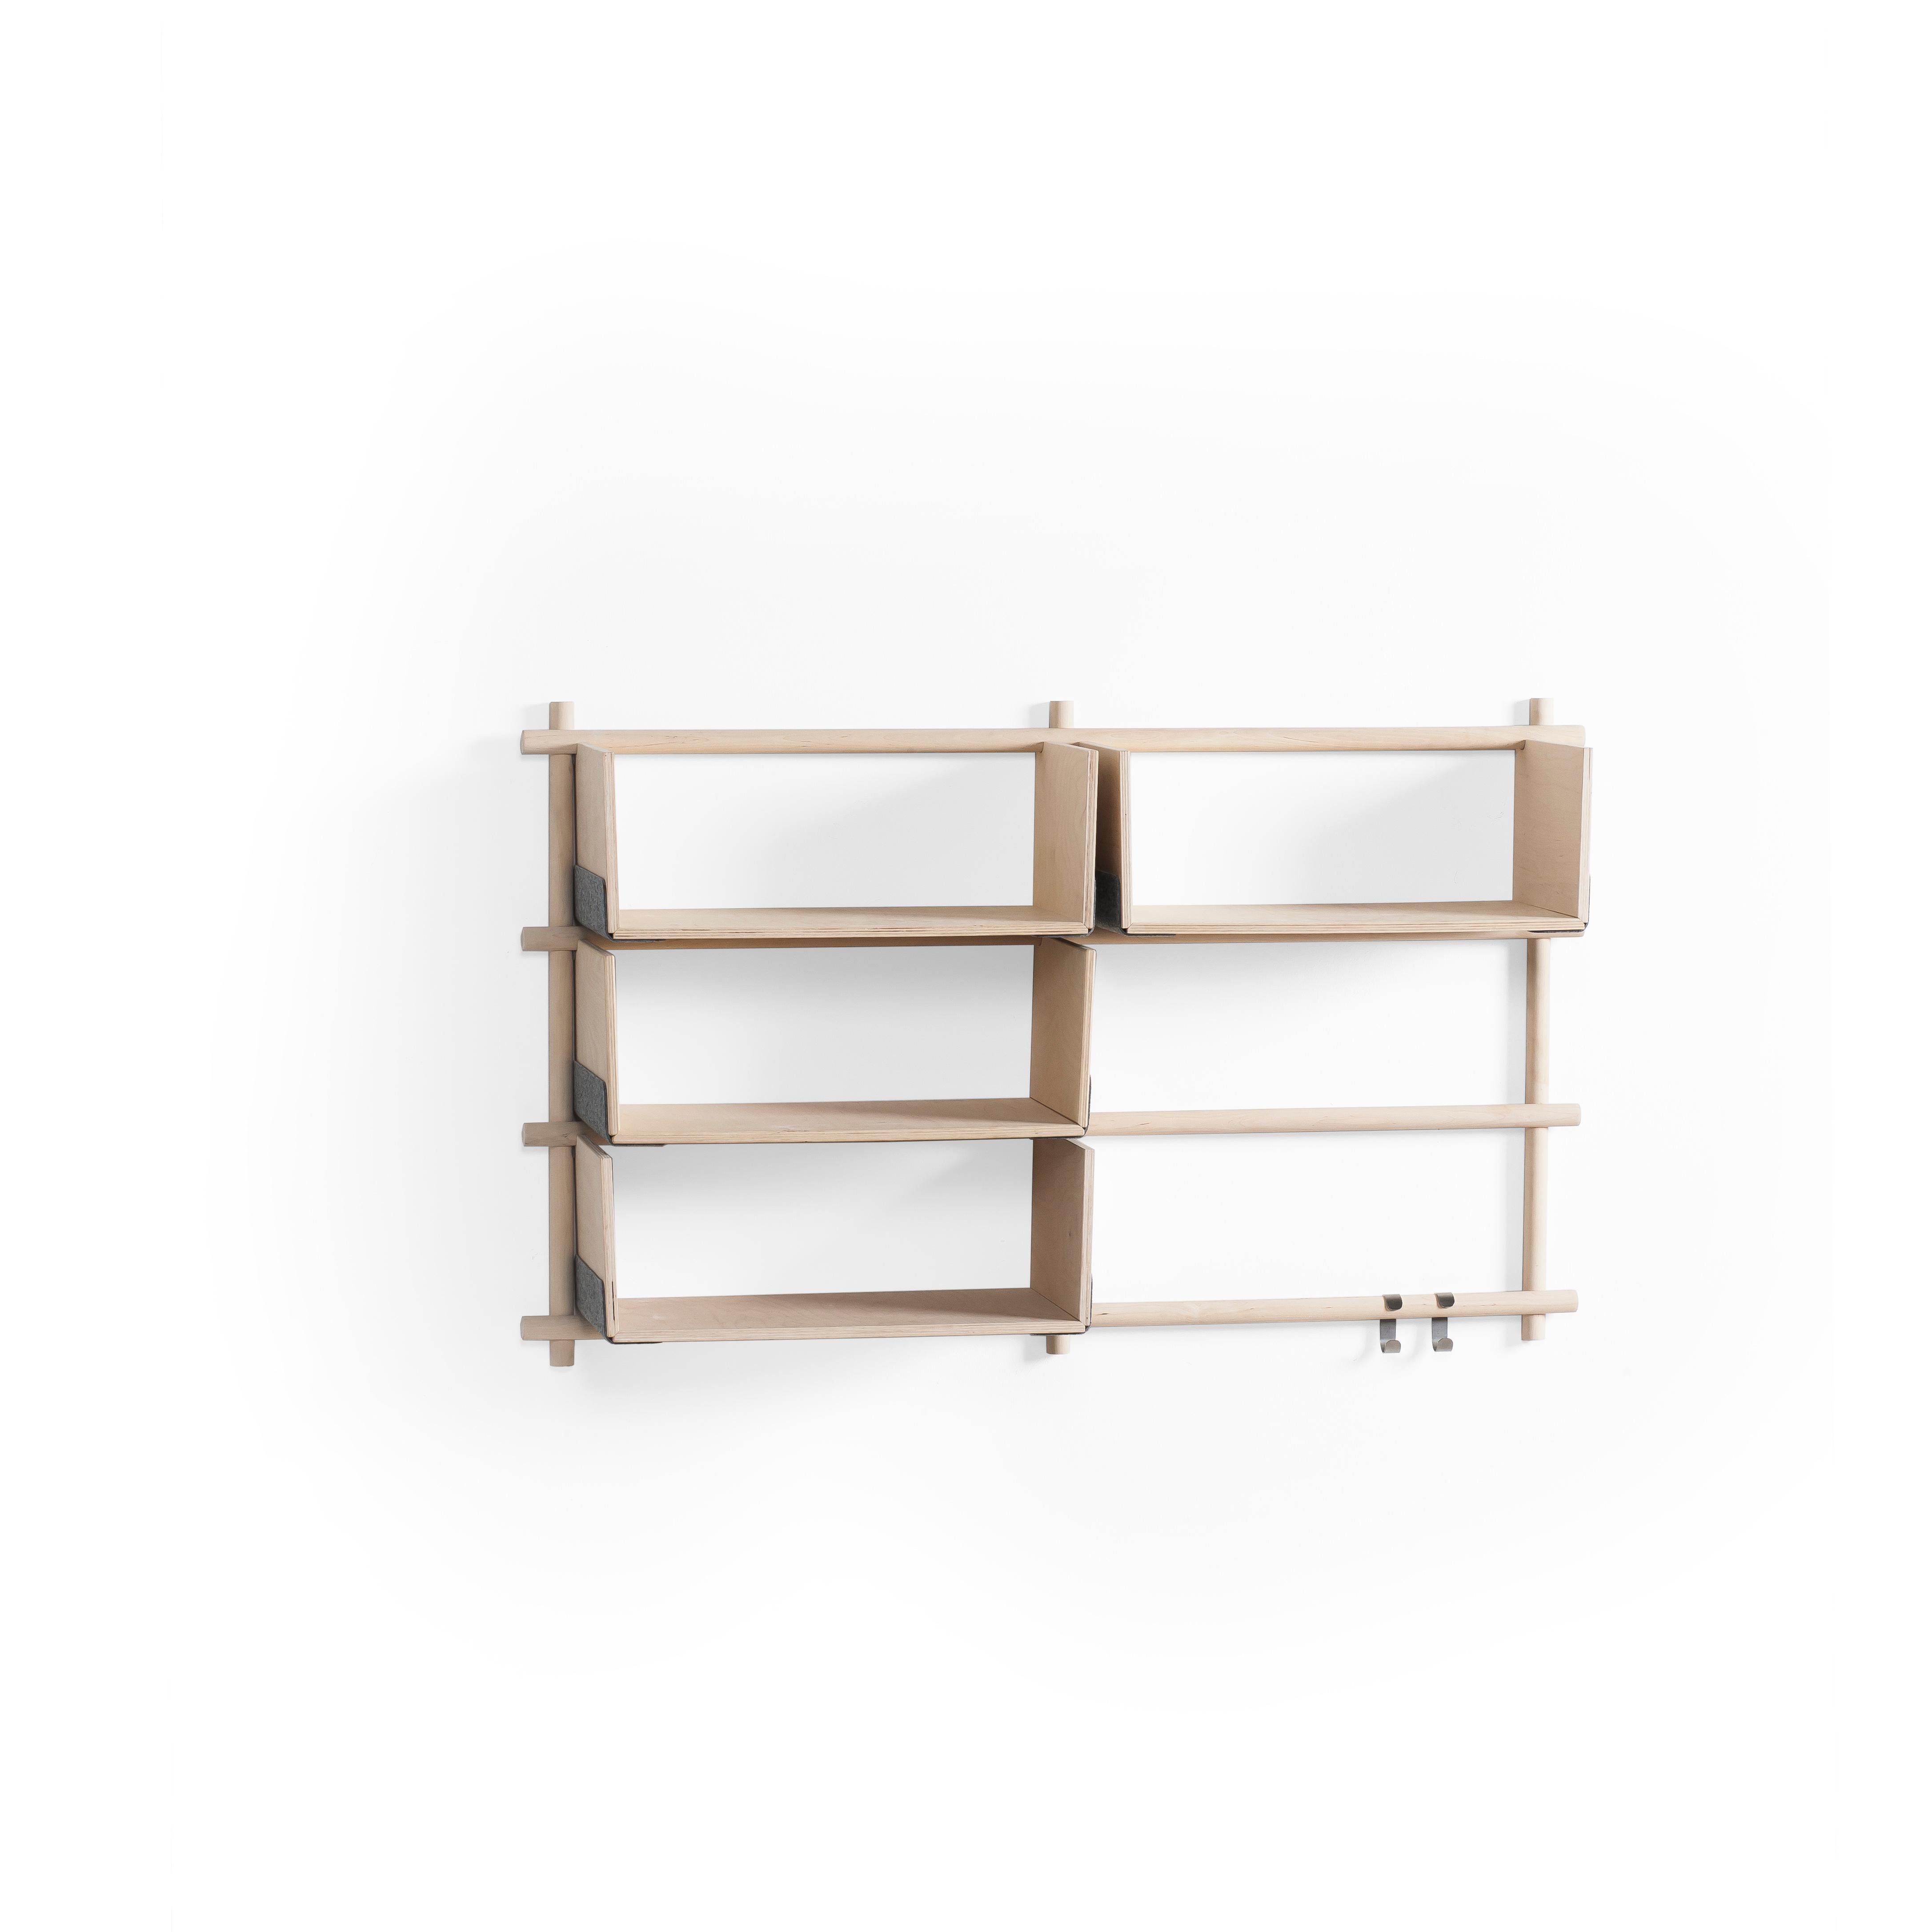 The Foldin shelving unit is characterized by simplicity. However, its strong construction is built to sustain the needs of the modern consumer. This modest wooden knock-down shelf can vary in size and form. The design is inspired by Japanese